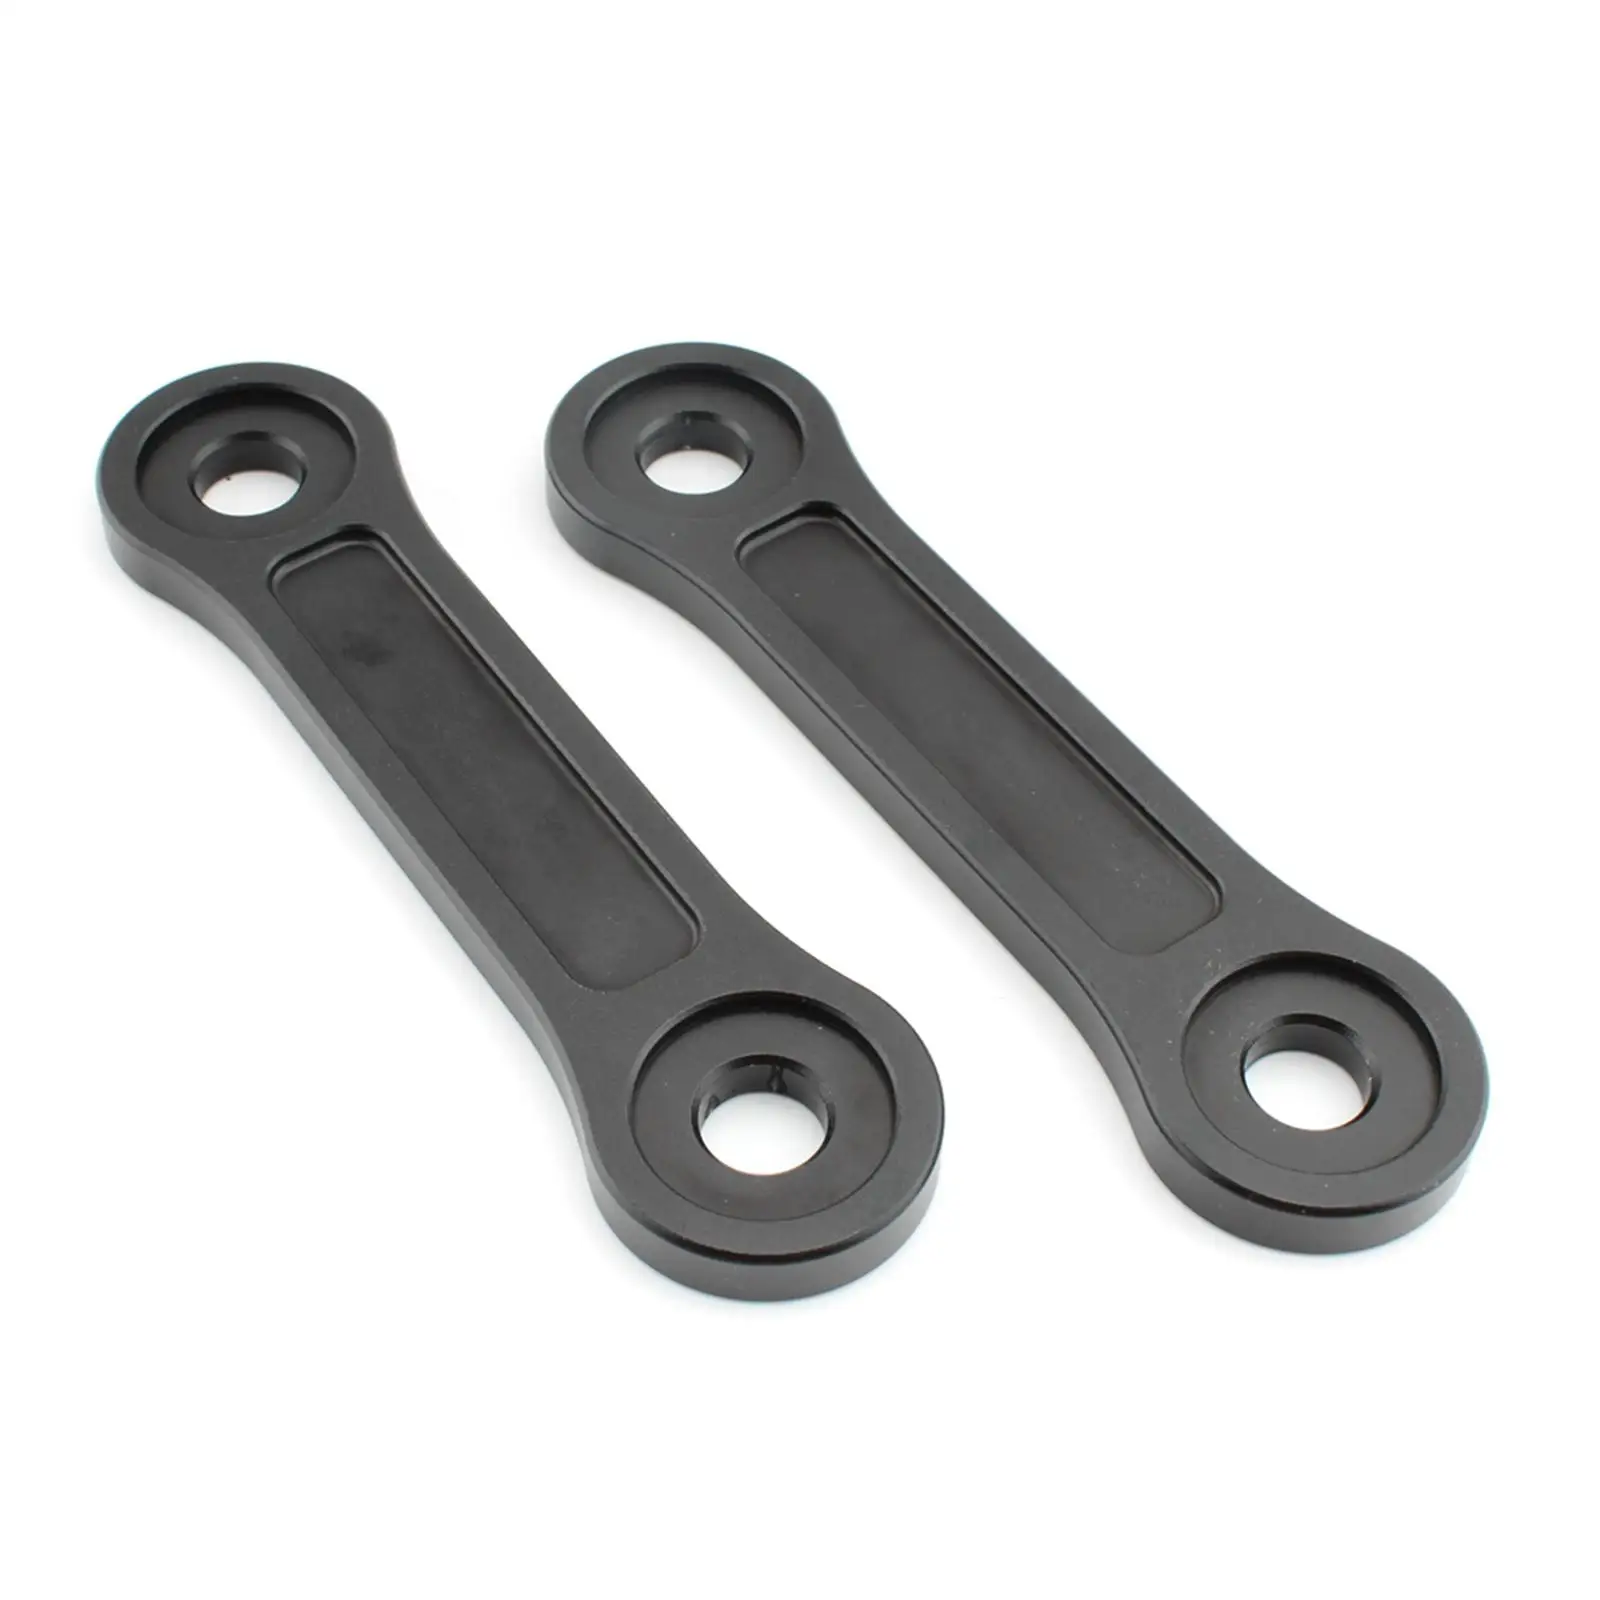 2 Pieces Motorcycle Lowering Links Kit Motorbike Accessory Black Sturdy Aluminium Alloy Dog Bones Linkages for Tiger 1200